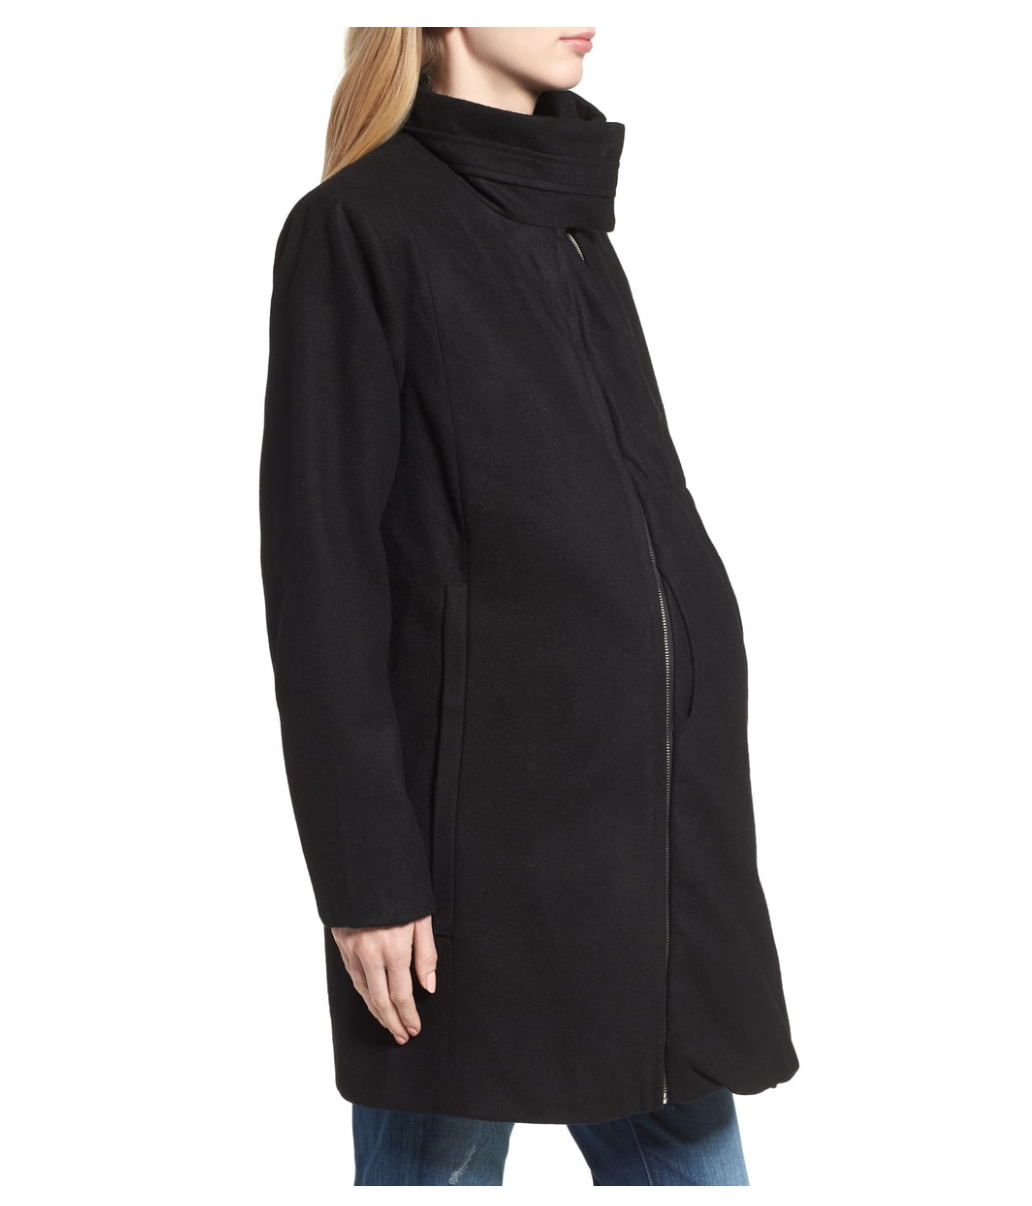 Product: Convertible 3-in-1 Maternity/Nursing Coat by MODERN ETERNITY